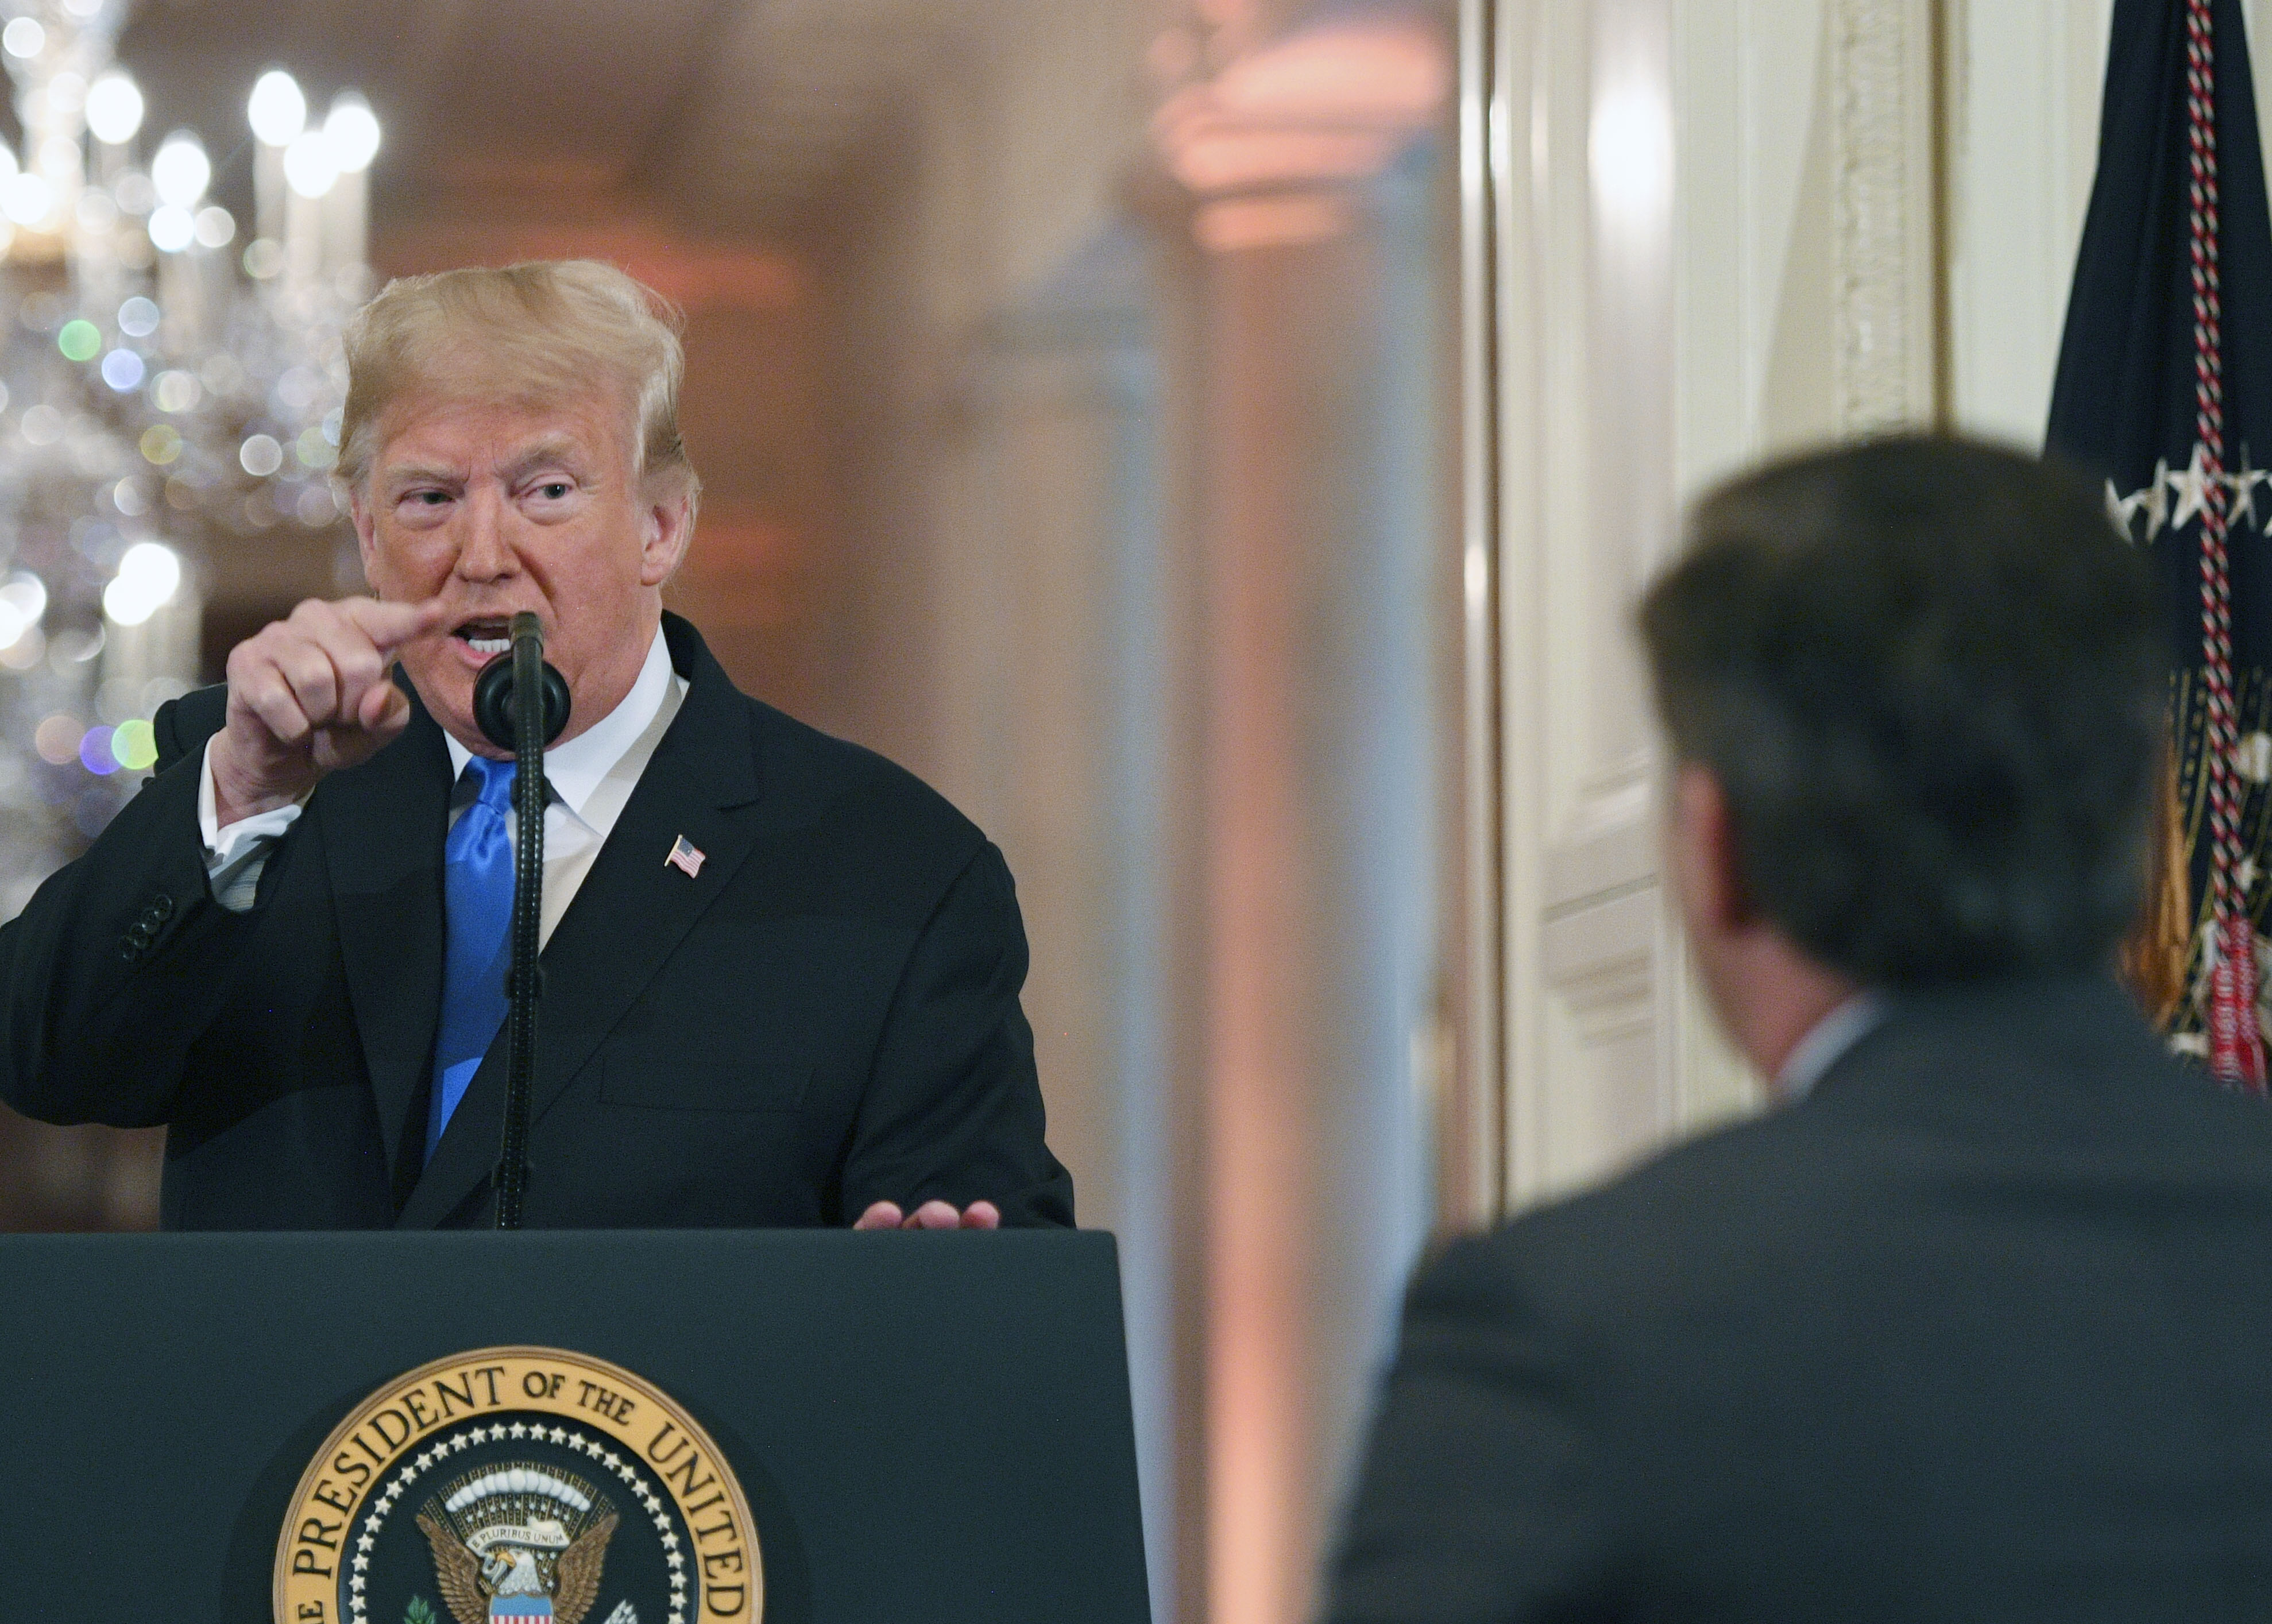 TOPSHOT - US President Donald Trump points to journalist Jim Acosta from CNN during a post-election press conference in the East Room of the White House in Washington, DC on November 7, 2018. (Photo by JIM WATSON/AFP/Getty Images)